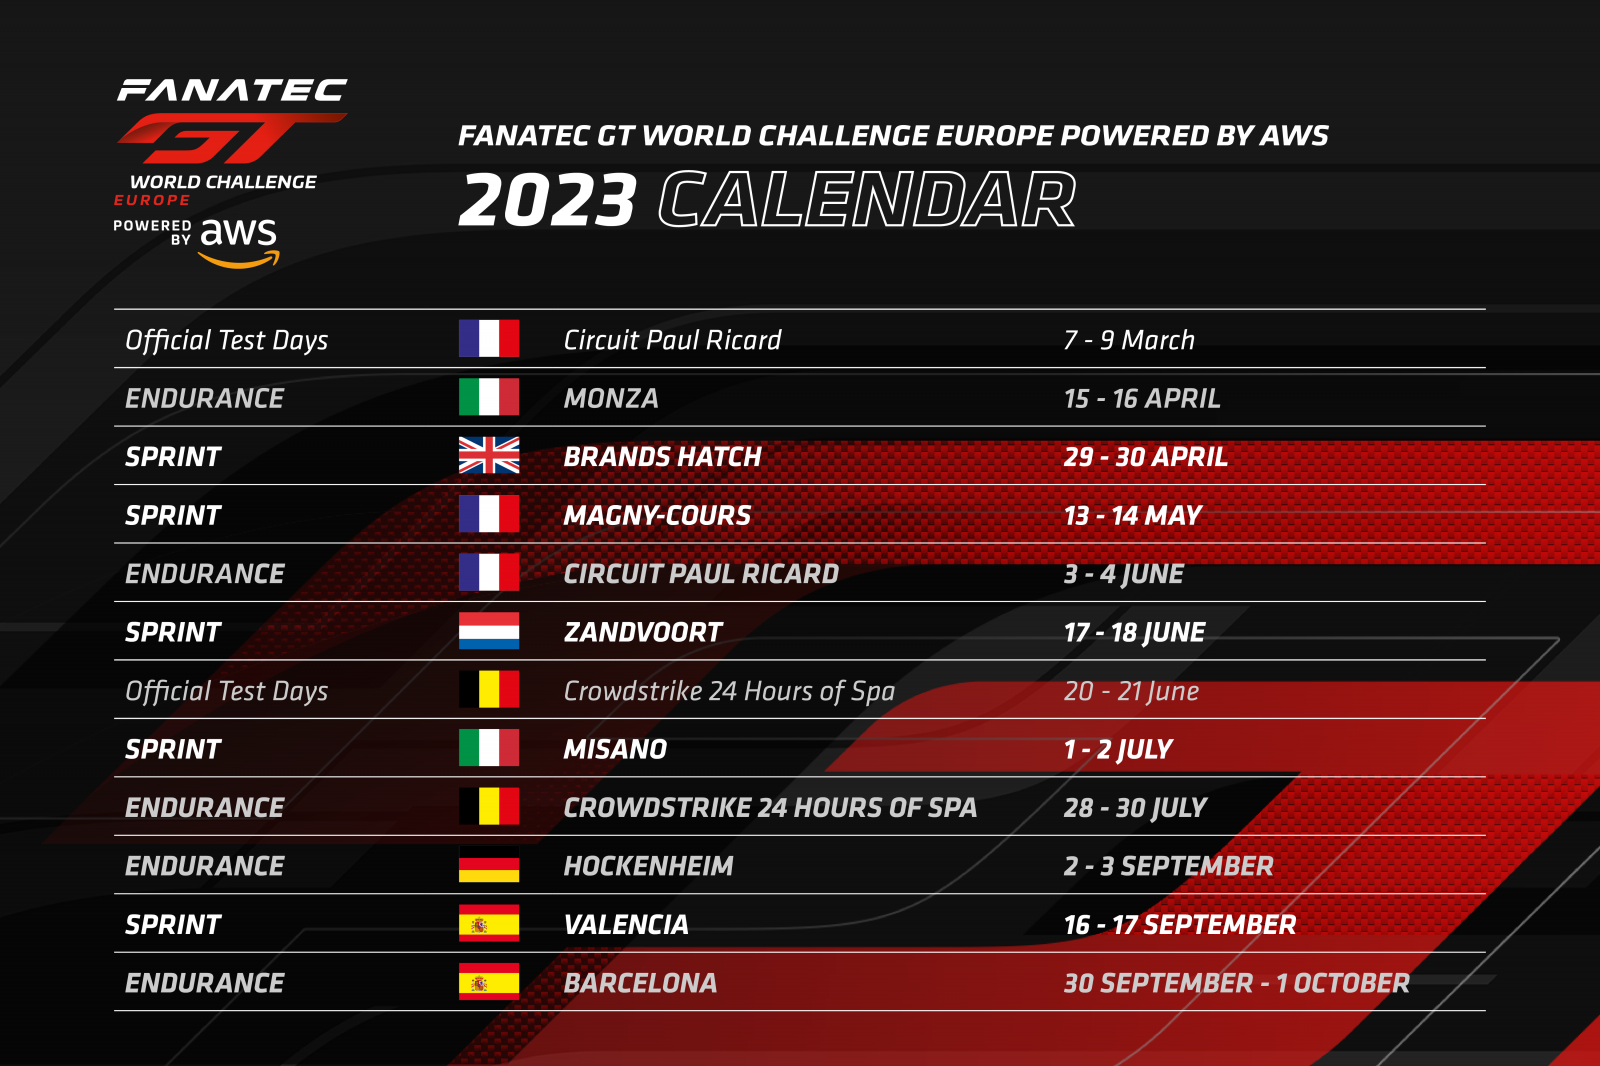 Consistency for 2023 Fanatec GT World Challenge Europe Powered by AWS calendar